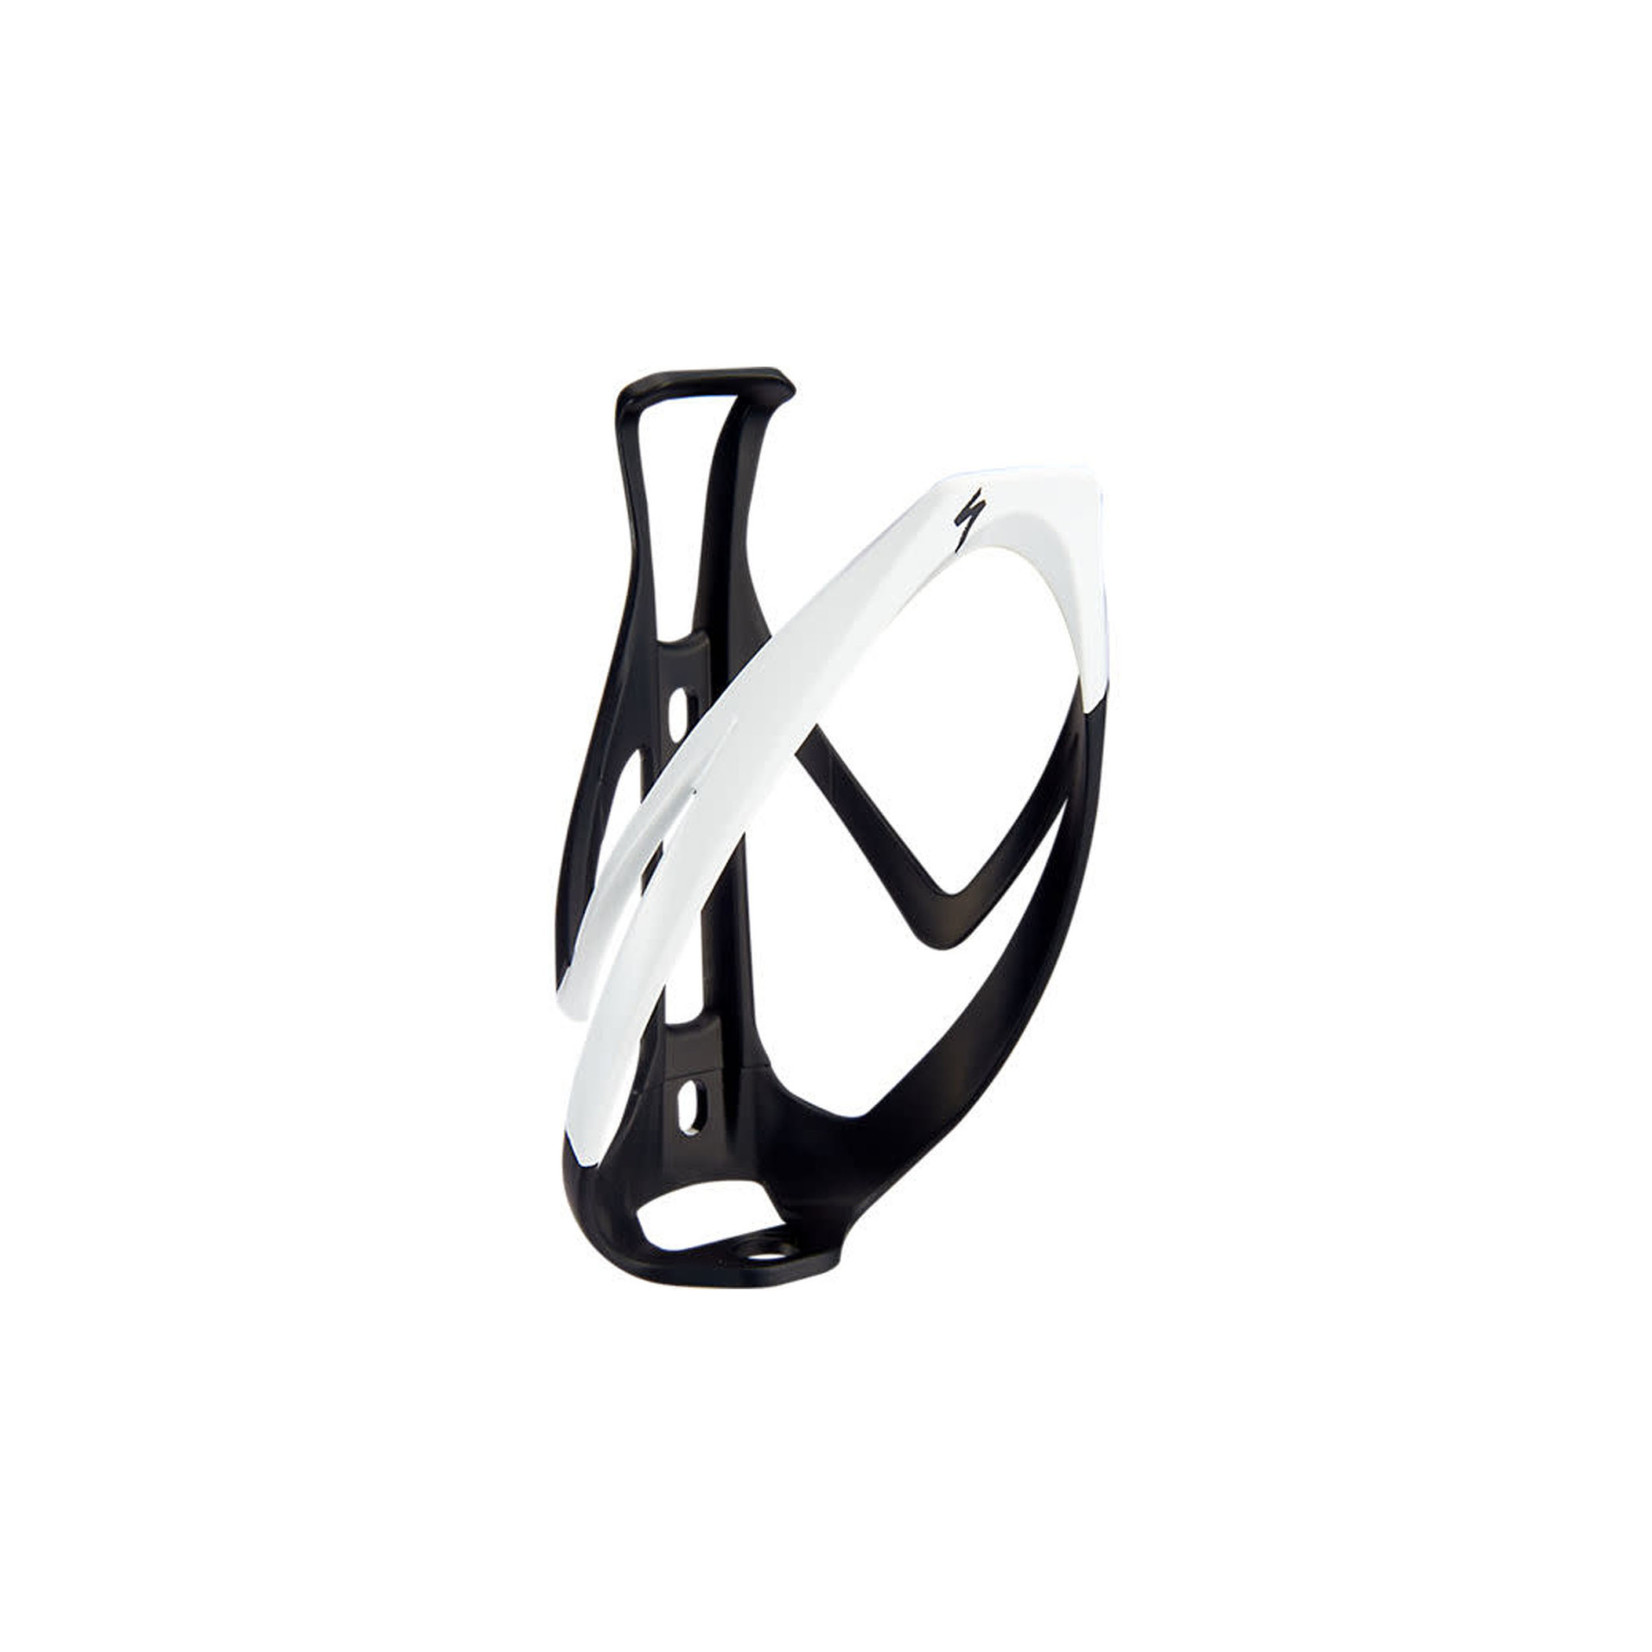 Specialized RIB CAGE II MATTE